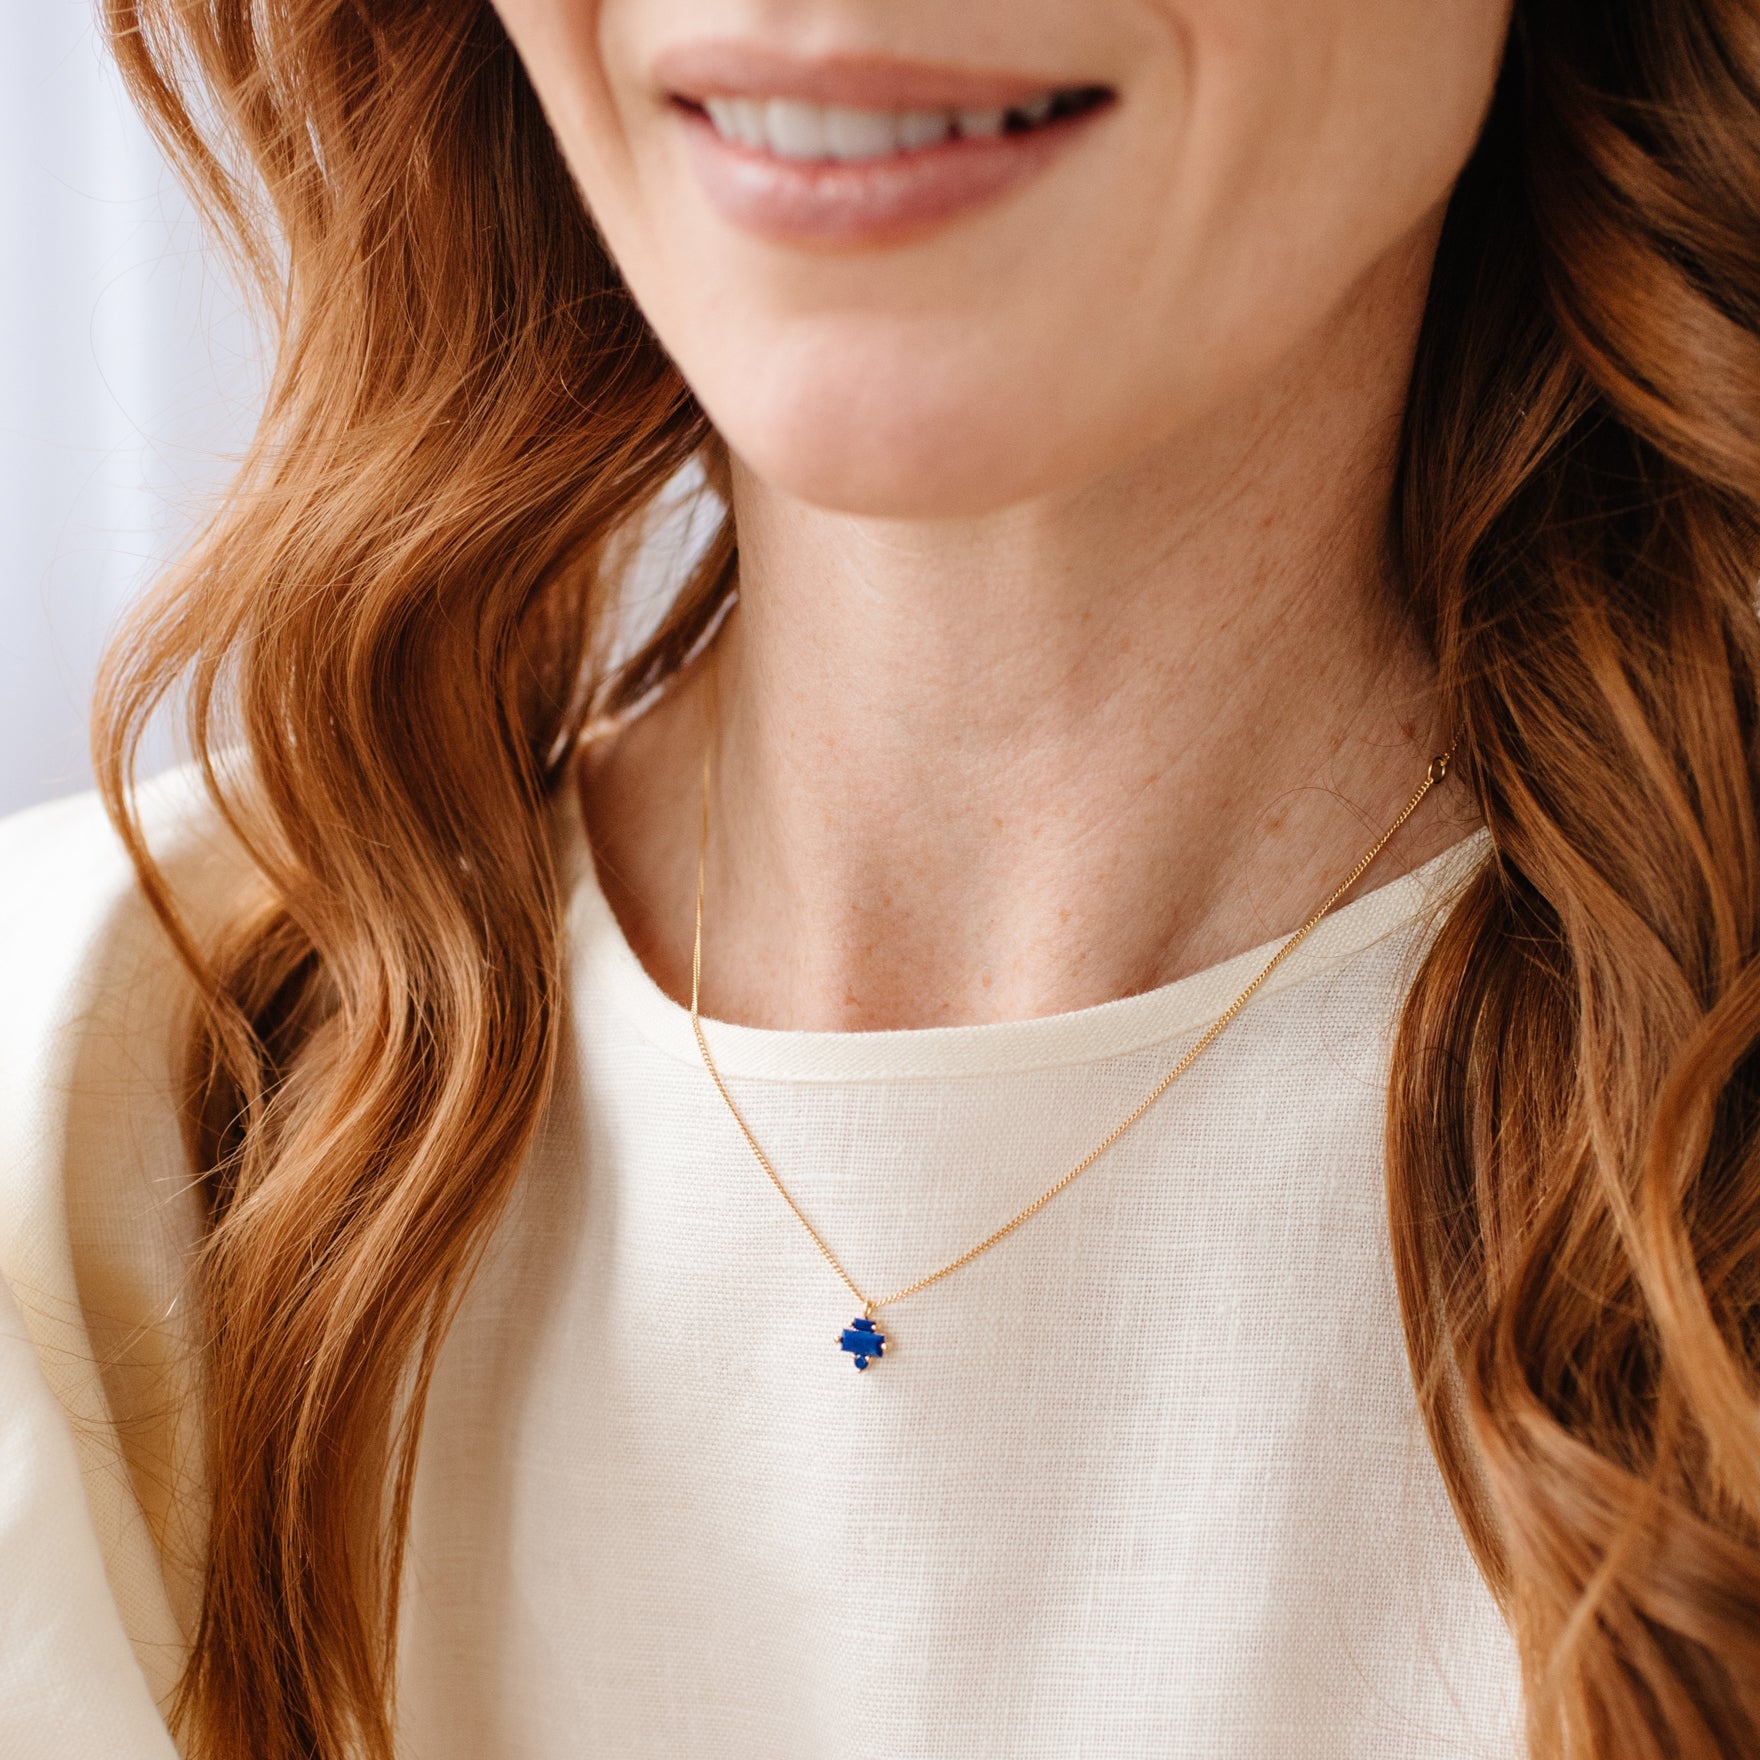 TINY LOYAL PRISM NECKLACE - LAPIS & GOLD - SO PRETTY CARA COTTER